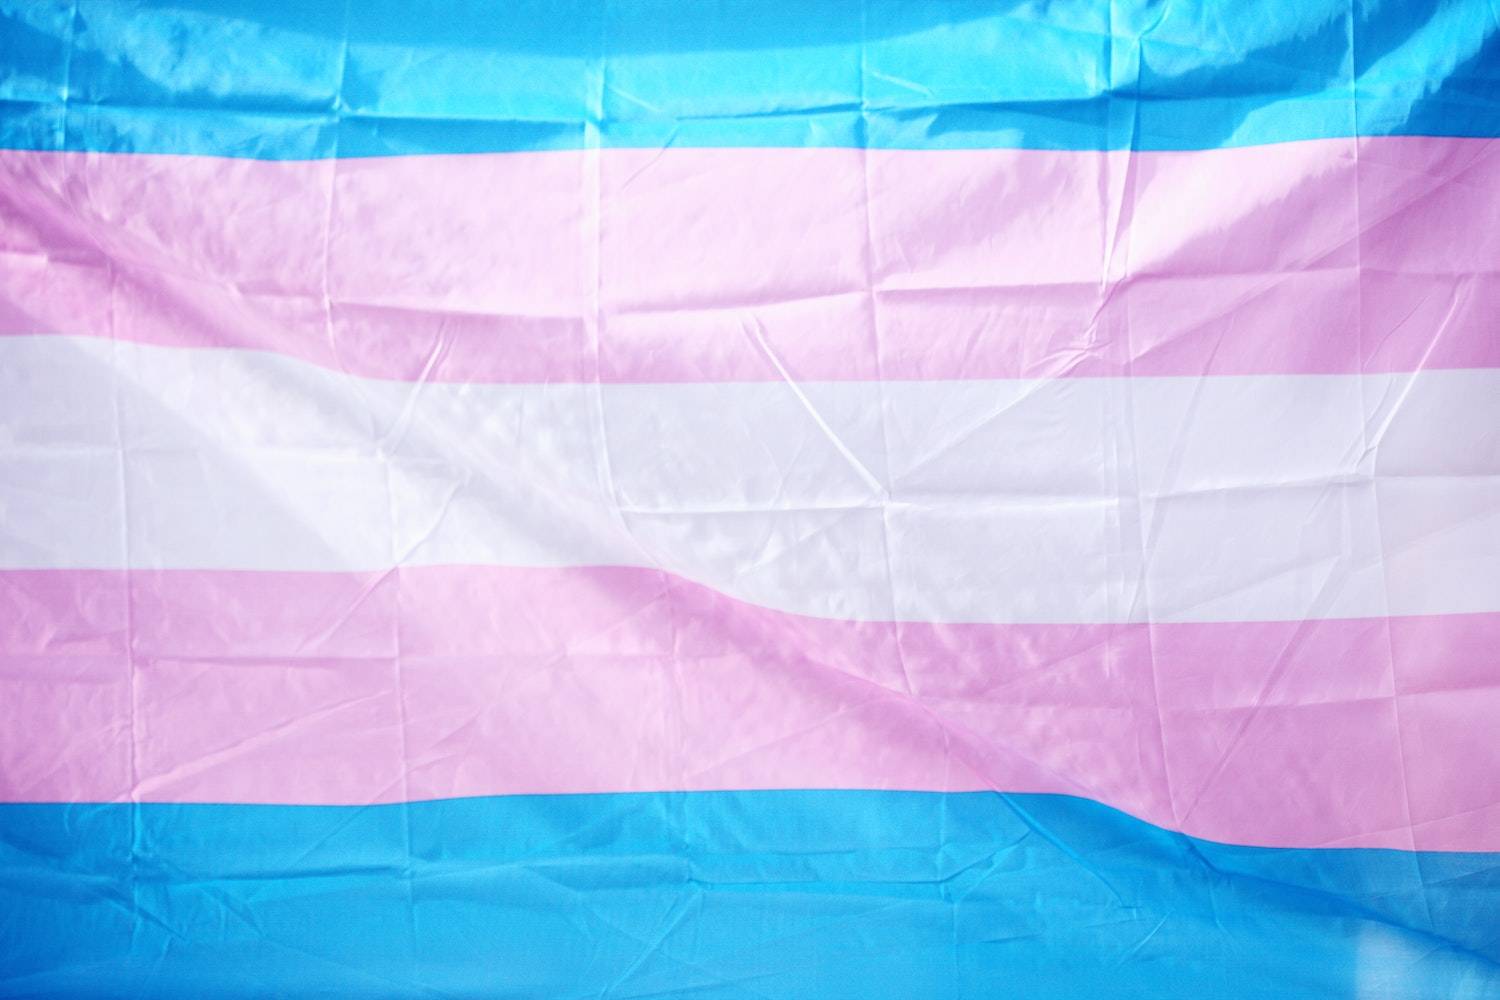 FILED: Fifth Circuit Must Reconsider Opinion that Misgenders Trans Litigant